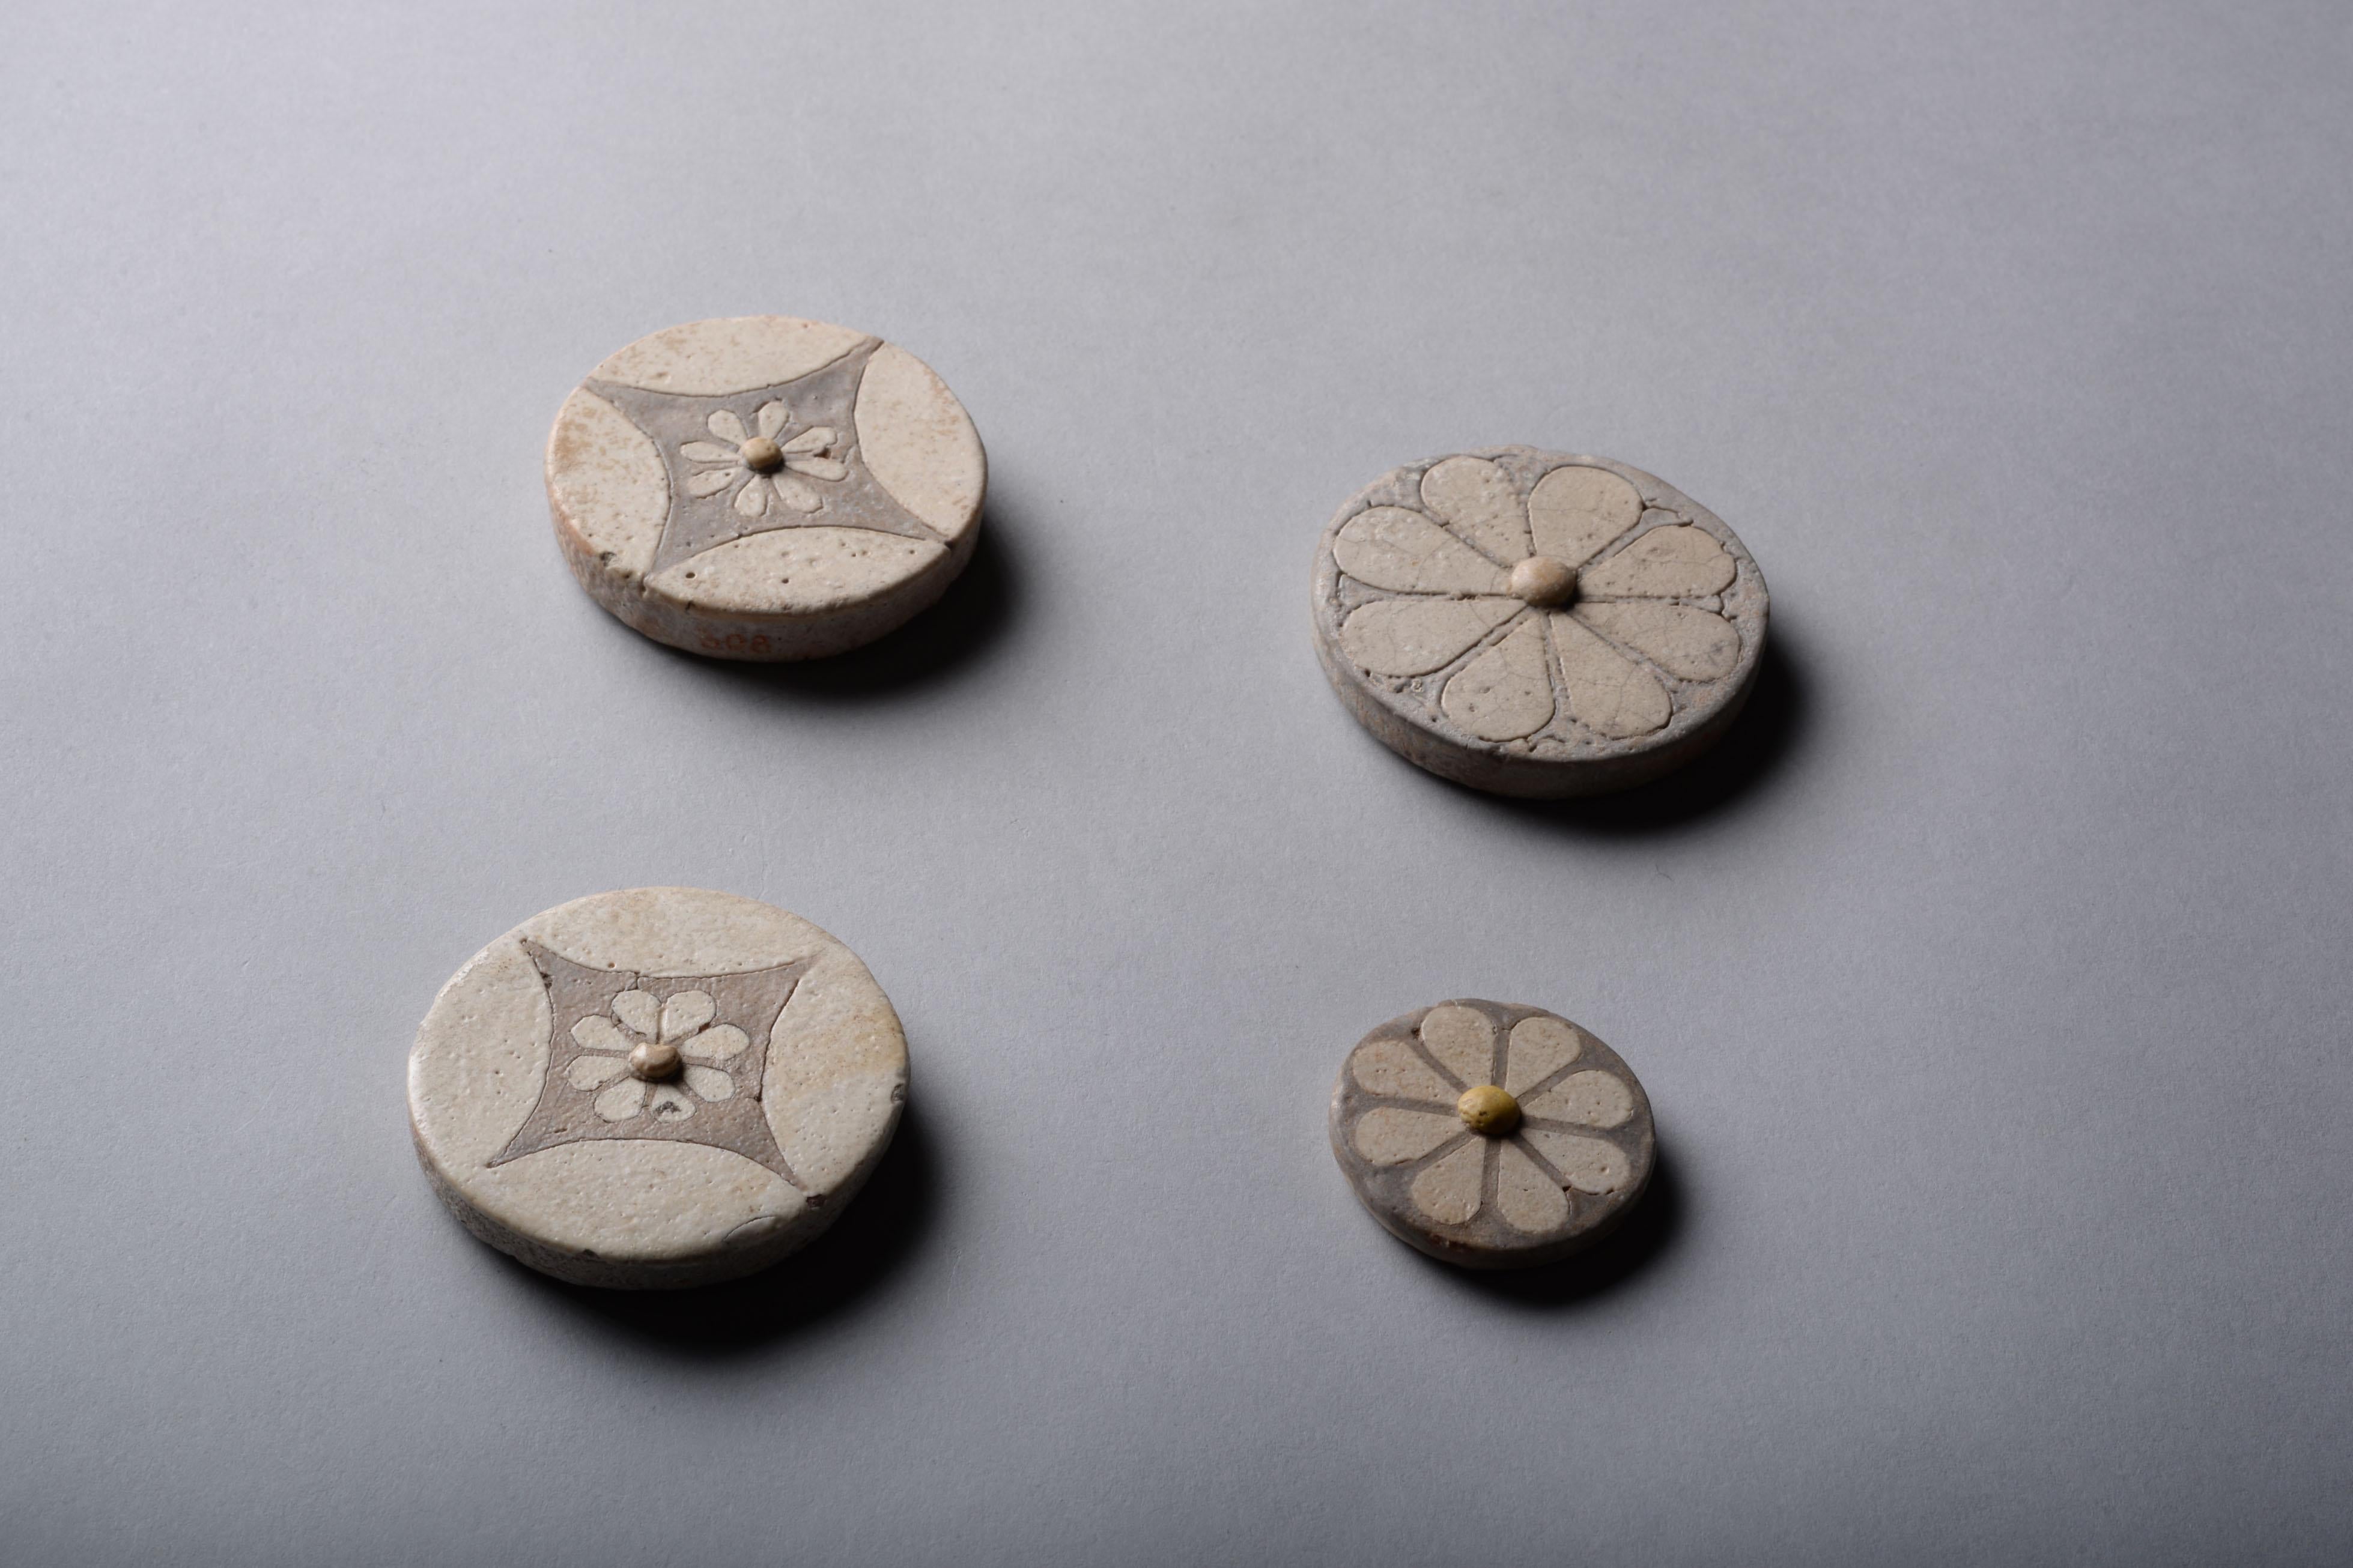 Four Egyptian faience rosettes, dating to the New Kingdom, Reign of Ramesses, 1550-1295 BC.

These remarkable inlays are often called rosettes, though they probably depict daisies or mayflowers. They demonstrate accomplishment in faience artistry,